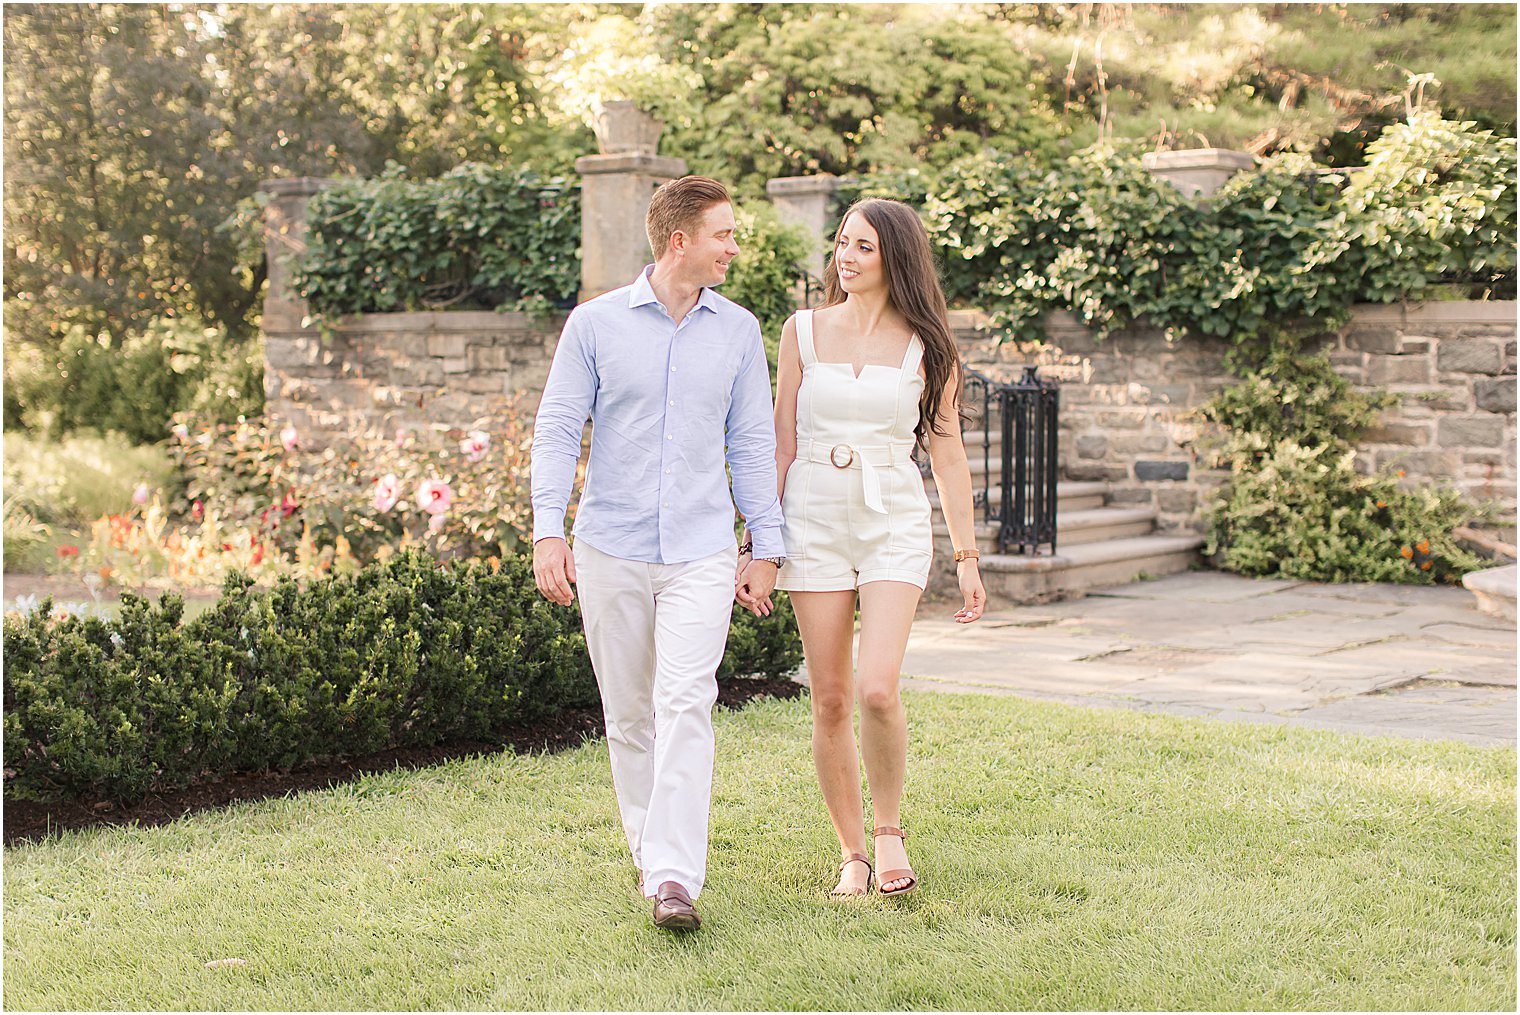 bride and groom hold hands walking through garden by stone wall